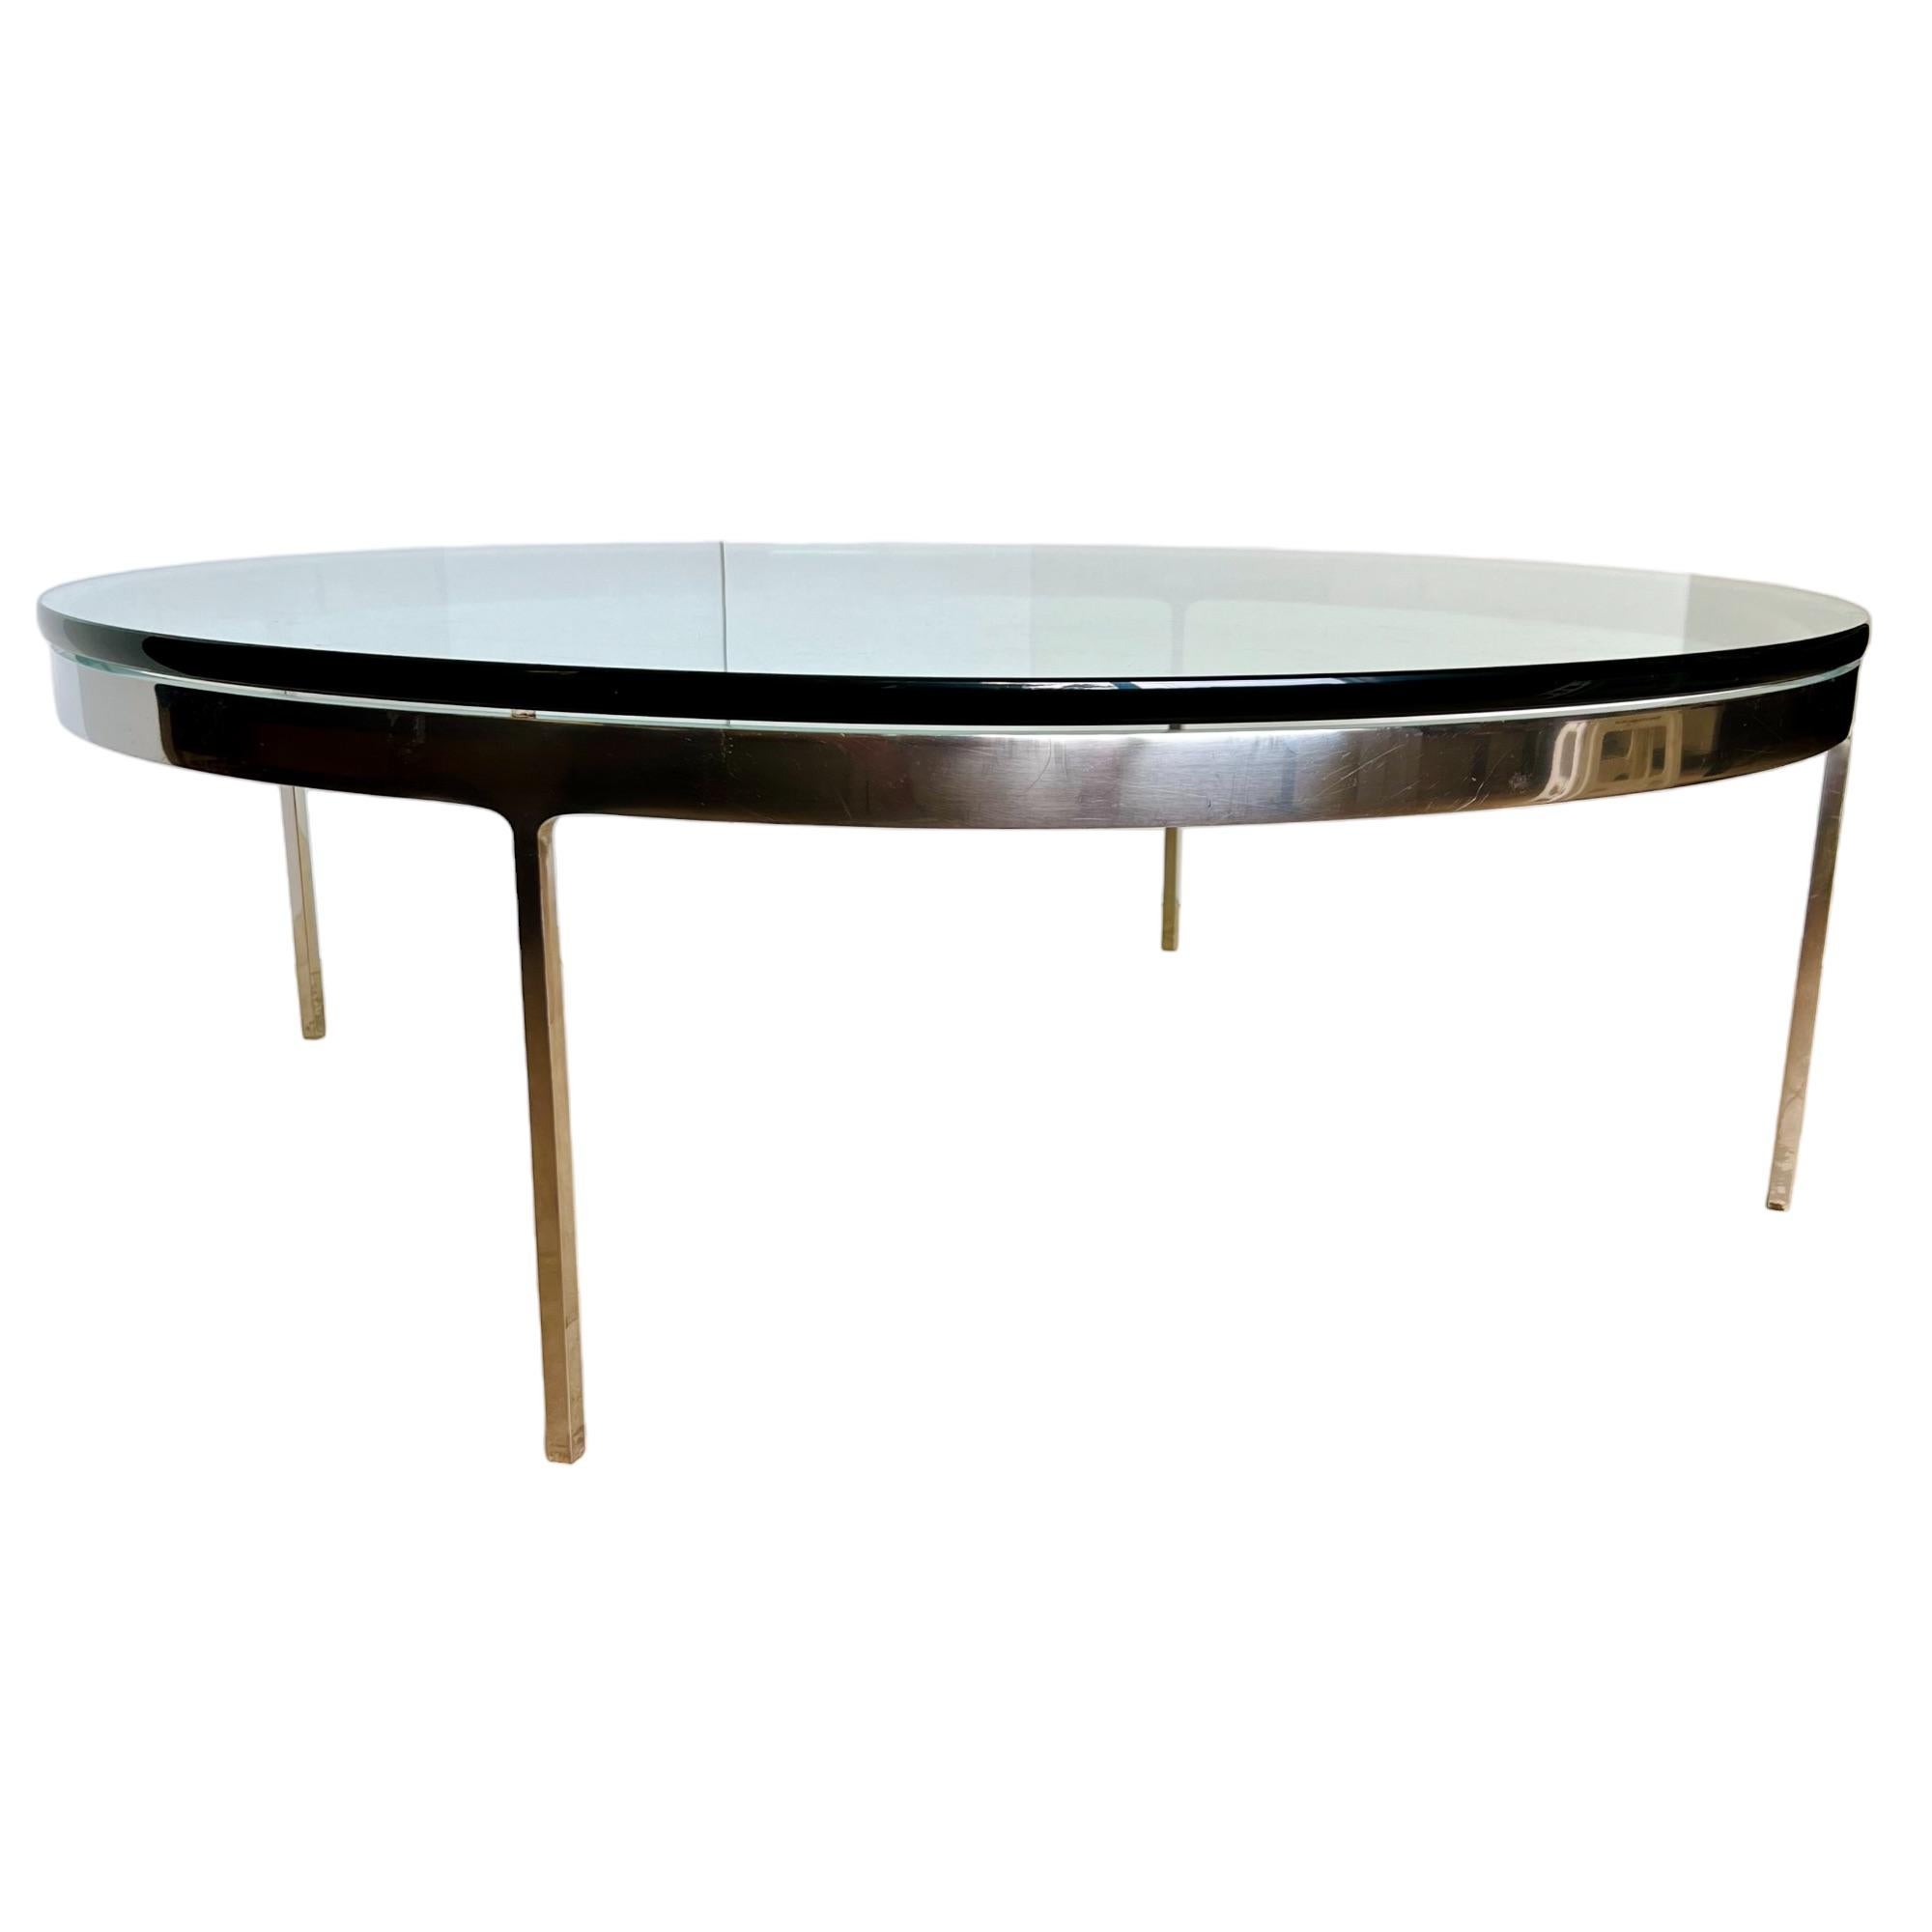 American Mid-Century Modern Nicos Zographos 35 Series Low Table For Sale